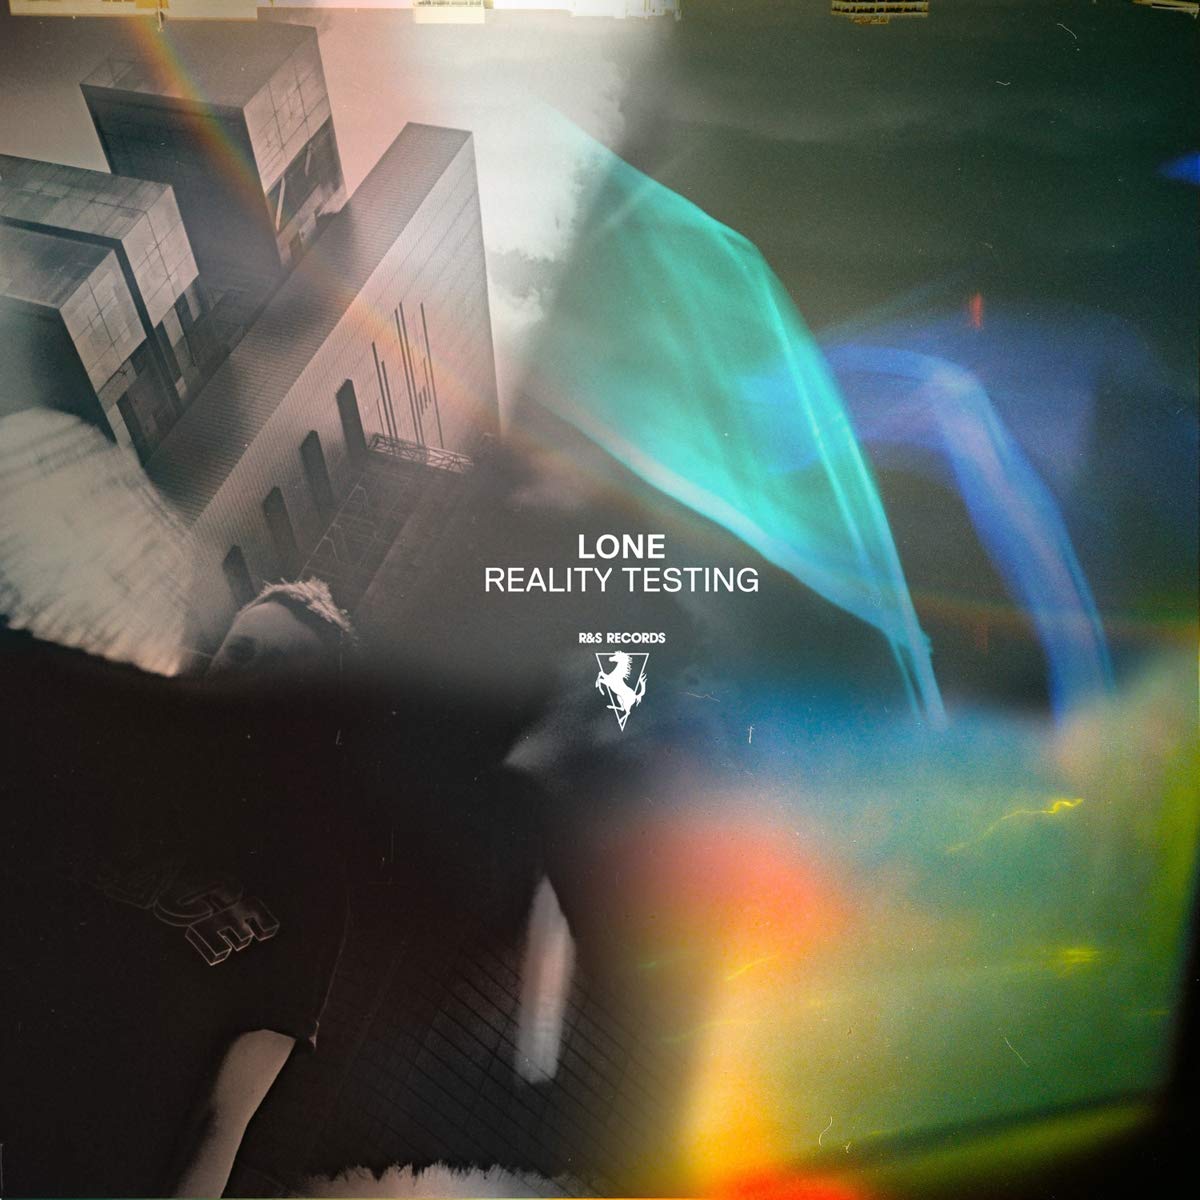 Lone - Reality Testing vinyl cover